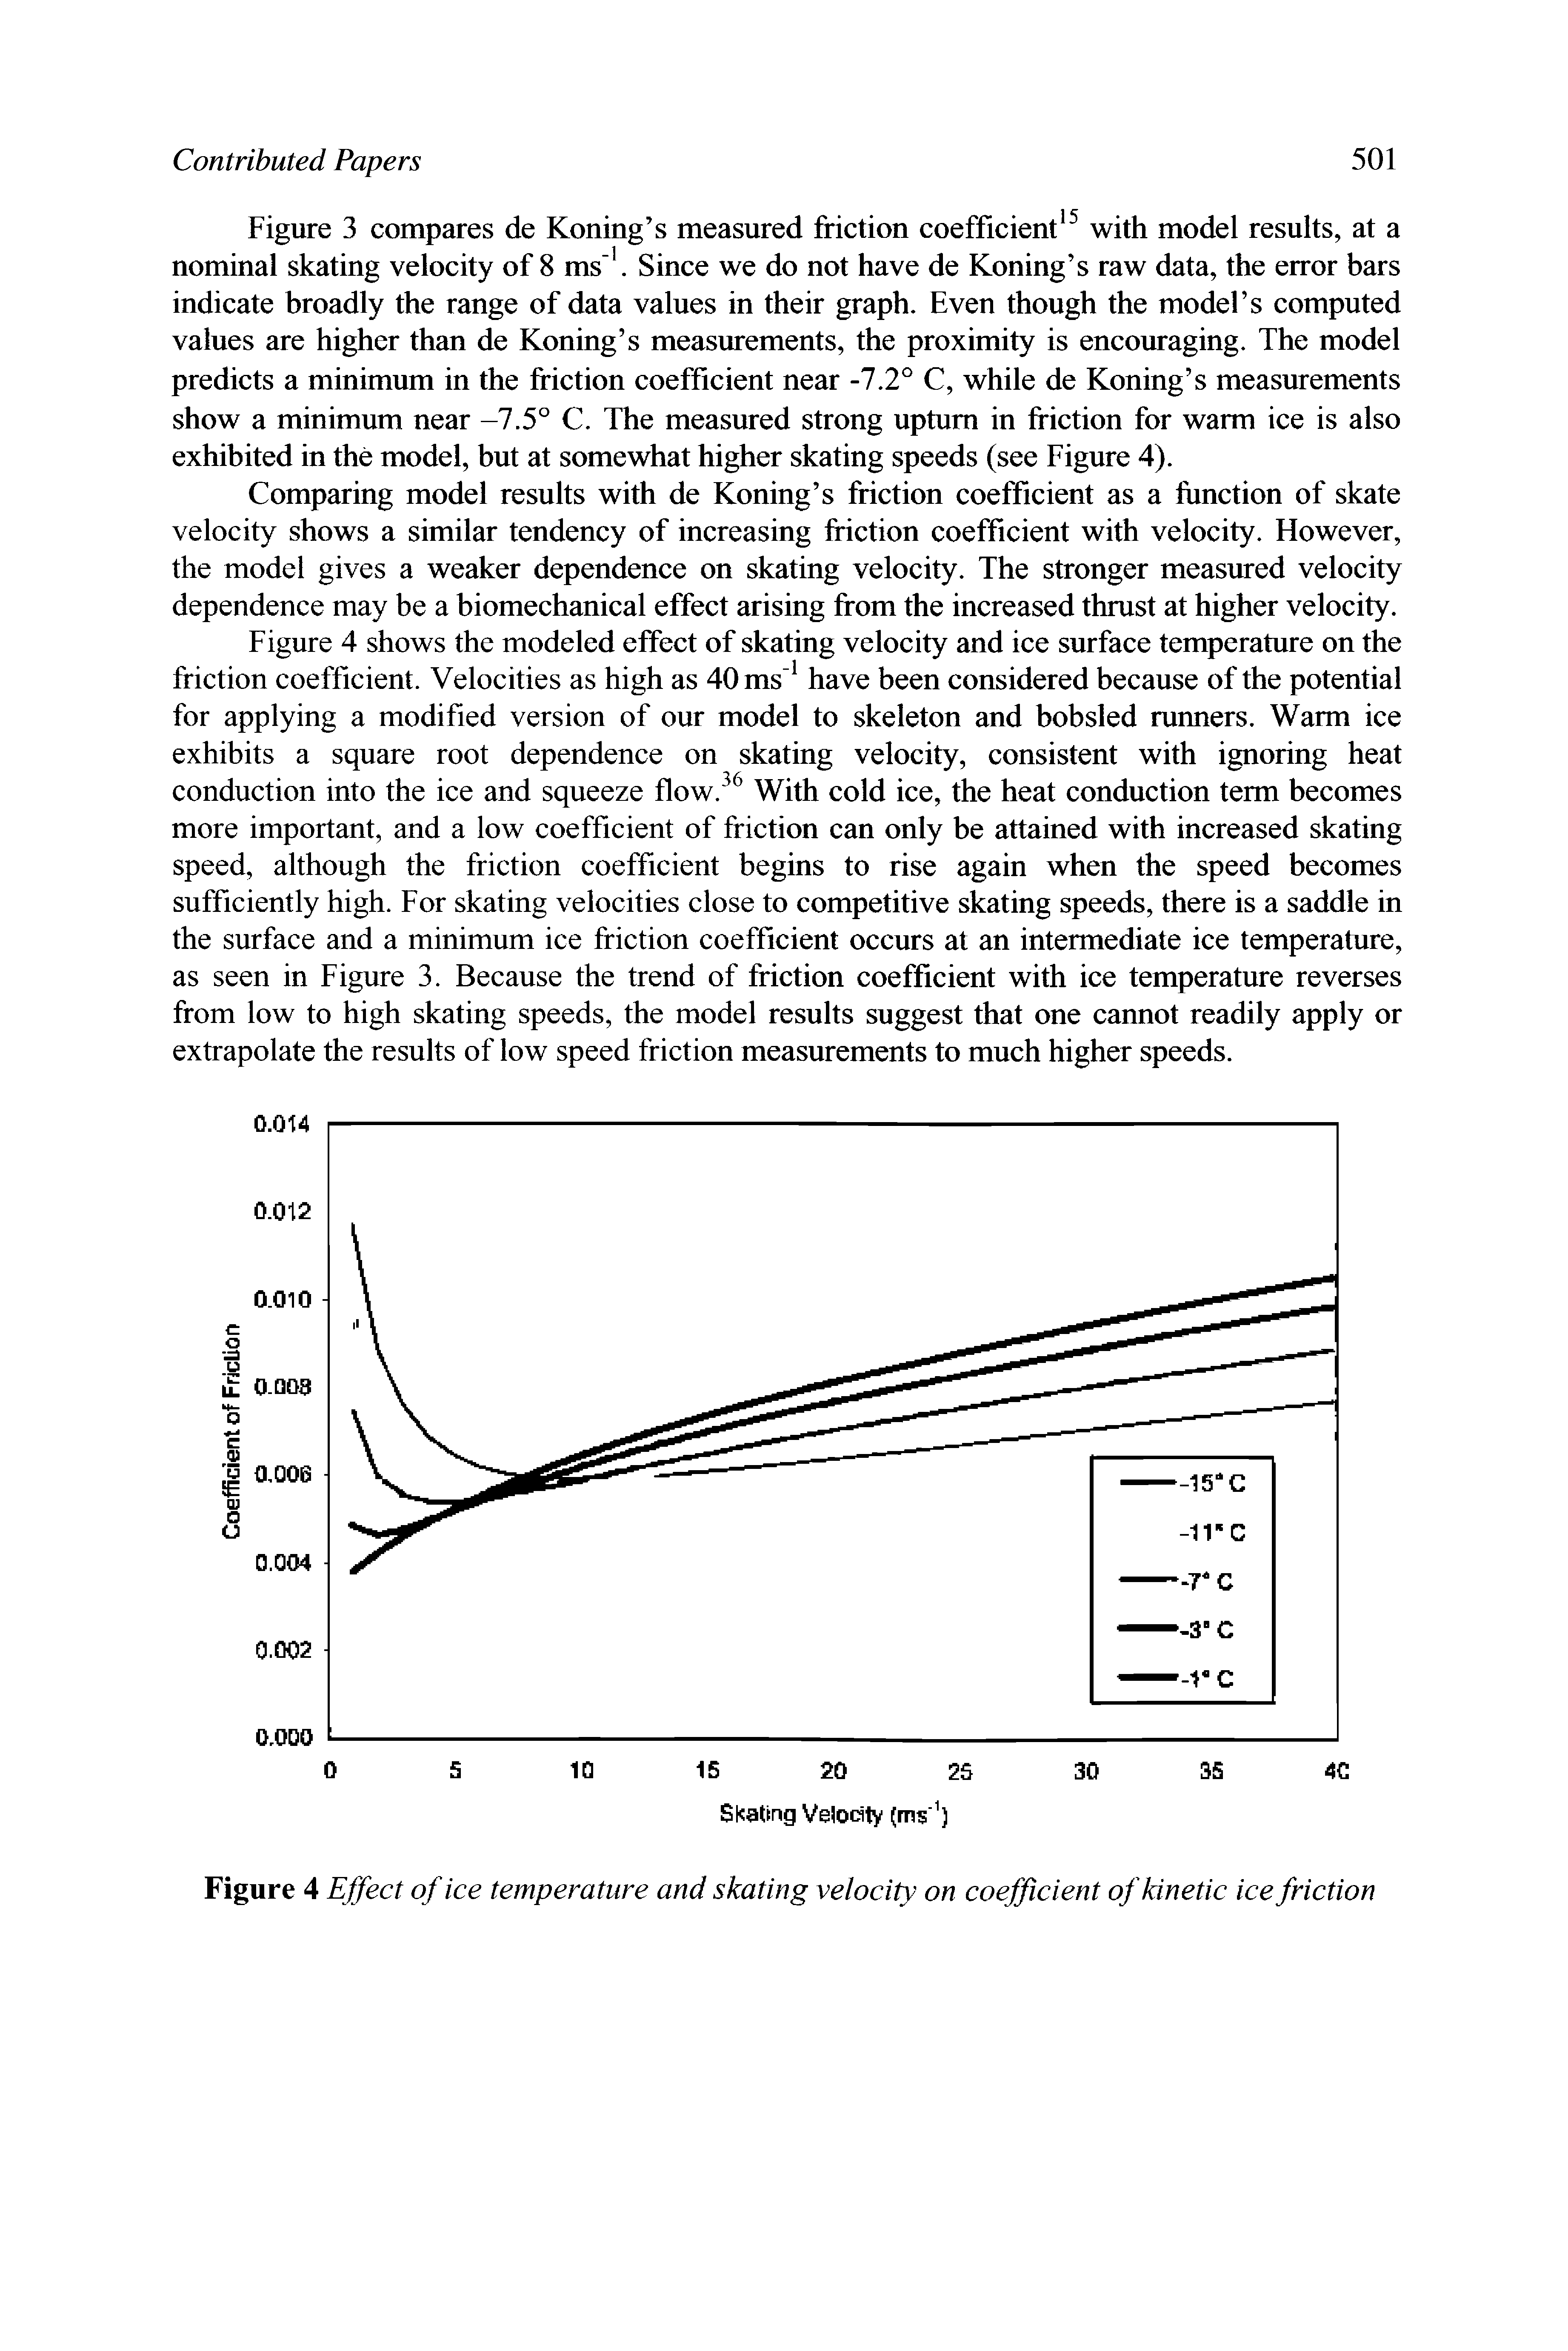 Figure 4 Effect of ice temperature and skating velocity on coefficient of kinetic ice friction...